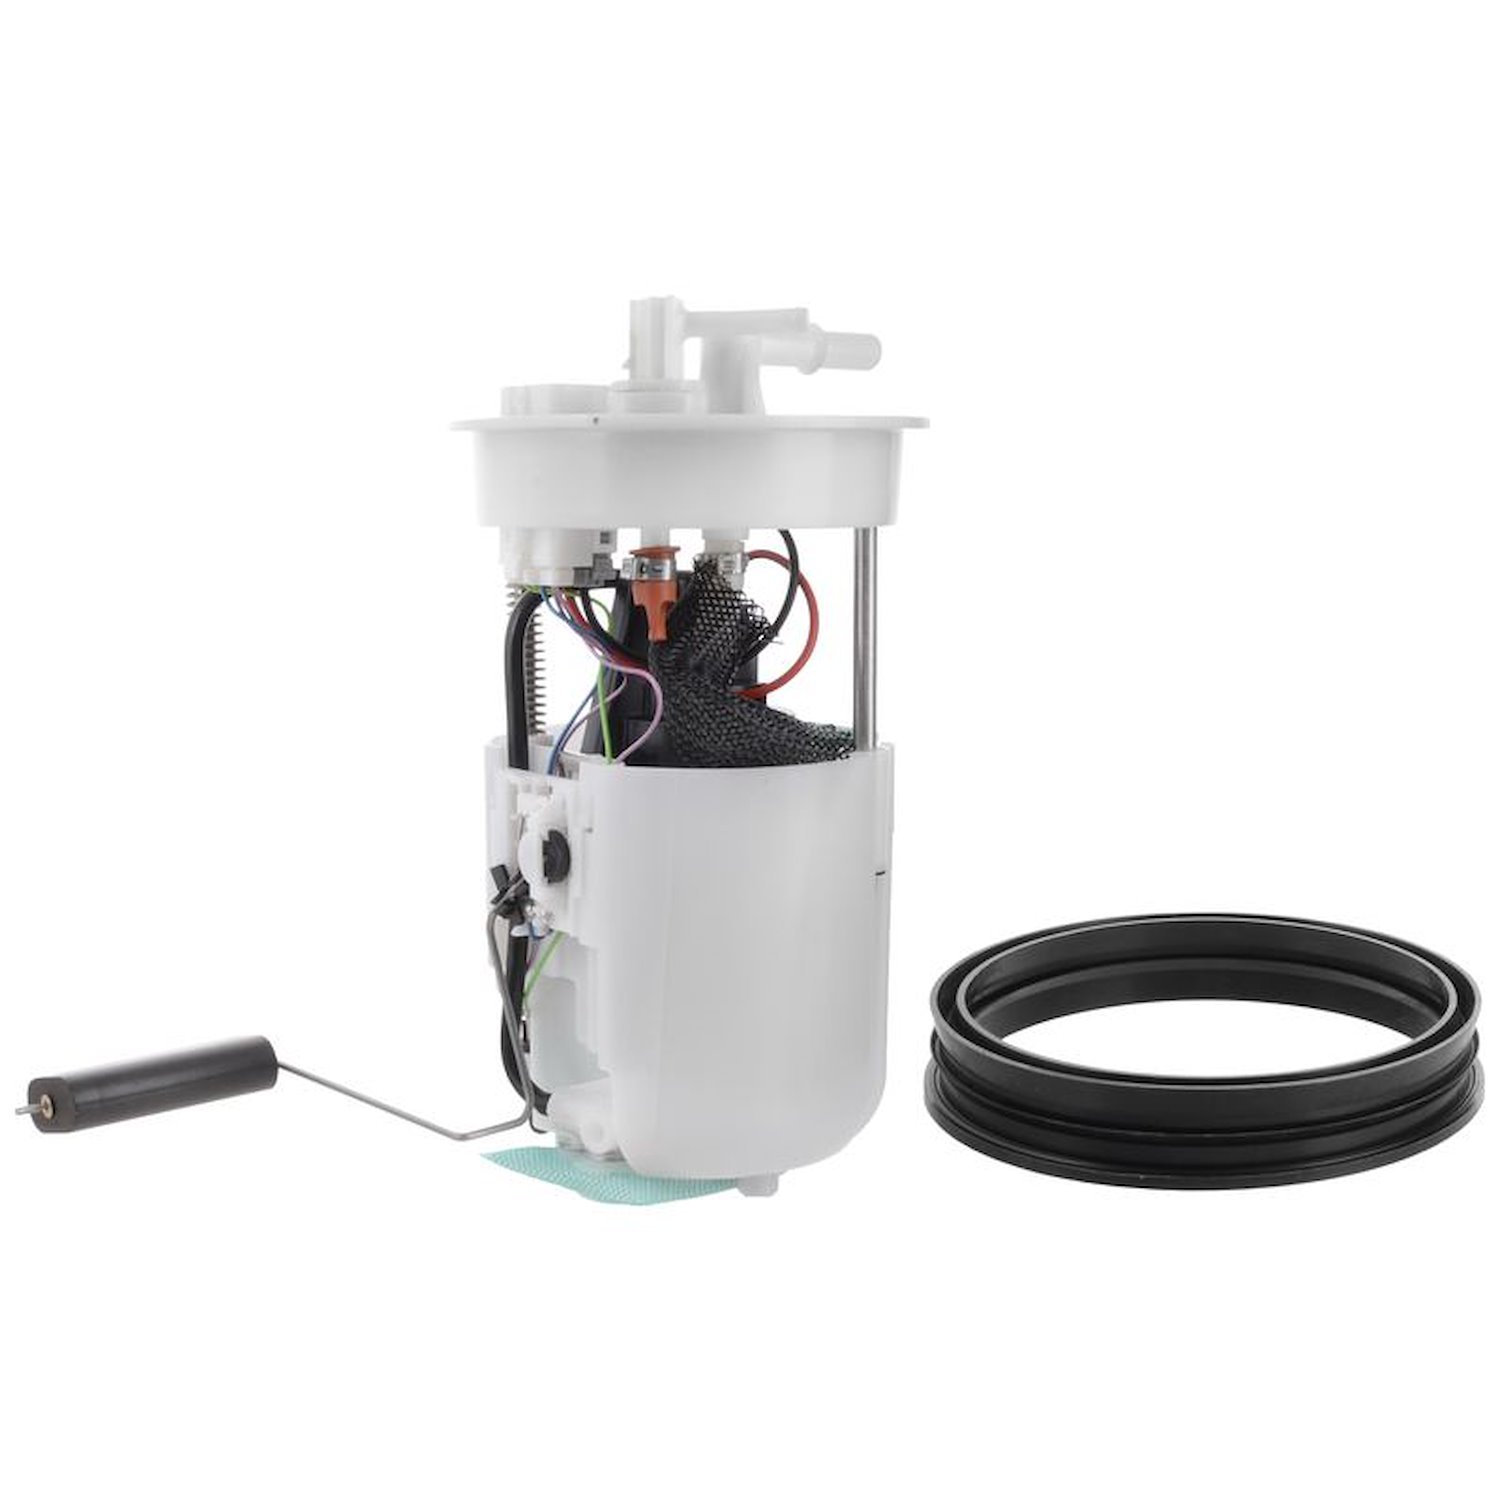 OE Chrysler/Dodge/Jeep Replacement Fuel Pump Module Assembly for 2001 Chrysler Sebring/Dodge Stratus/1999-2000 Mitsubishi Galant